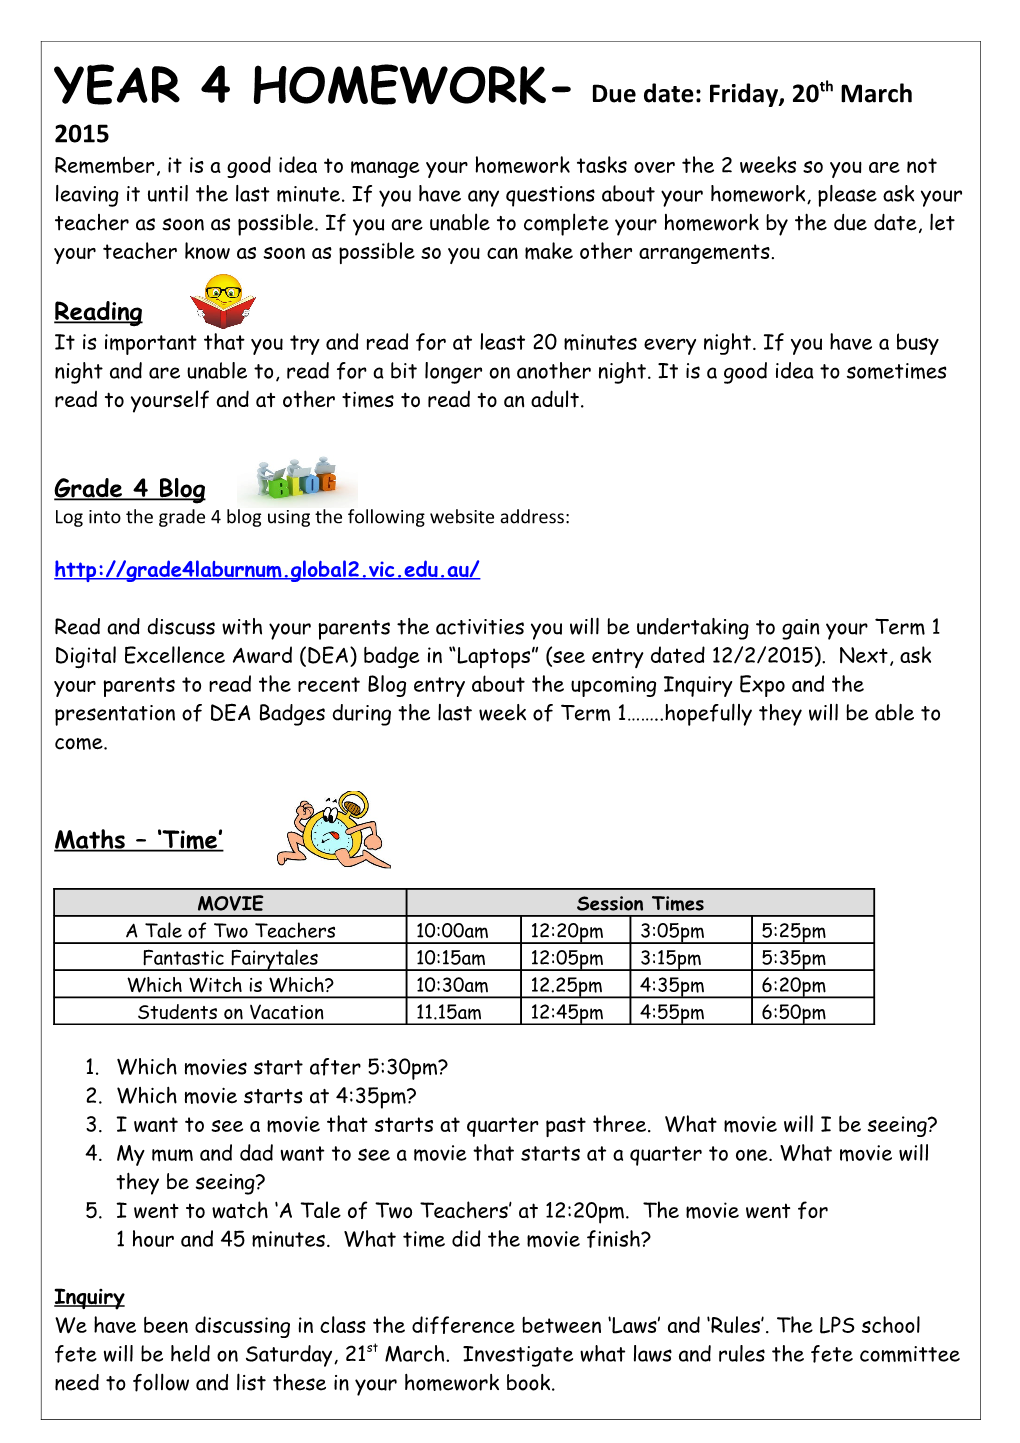 YEAR 4 HOMEWORK- Due Date: Friday, 20Th March 2015